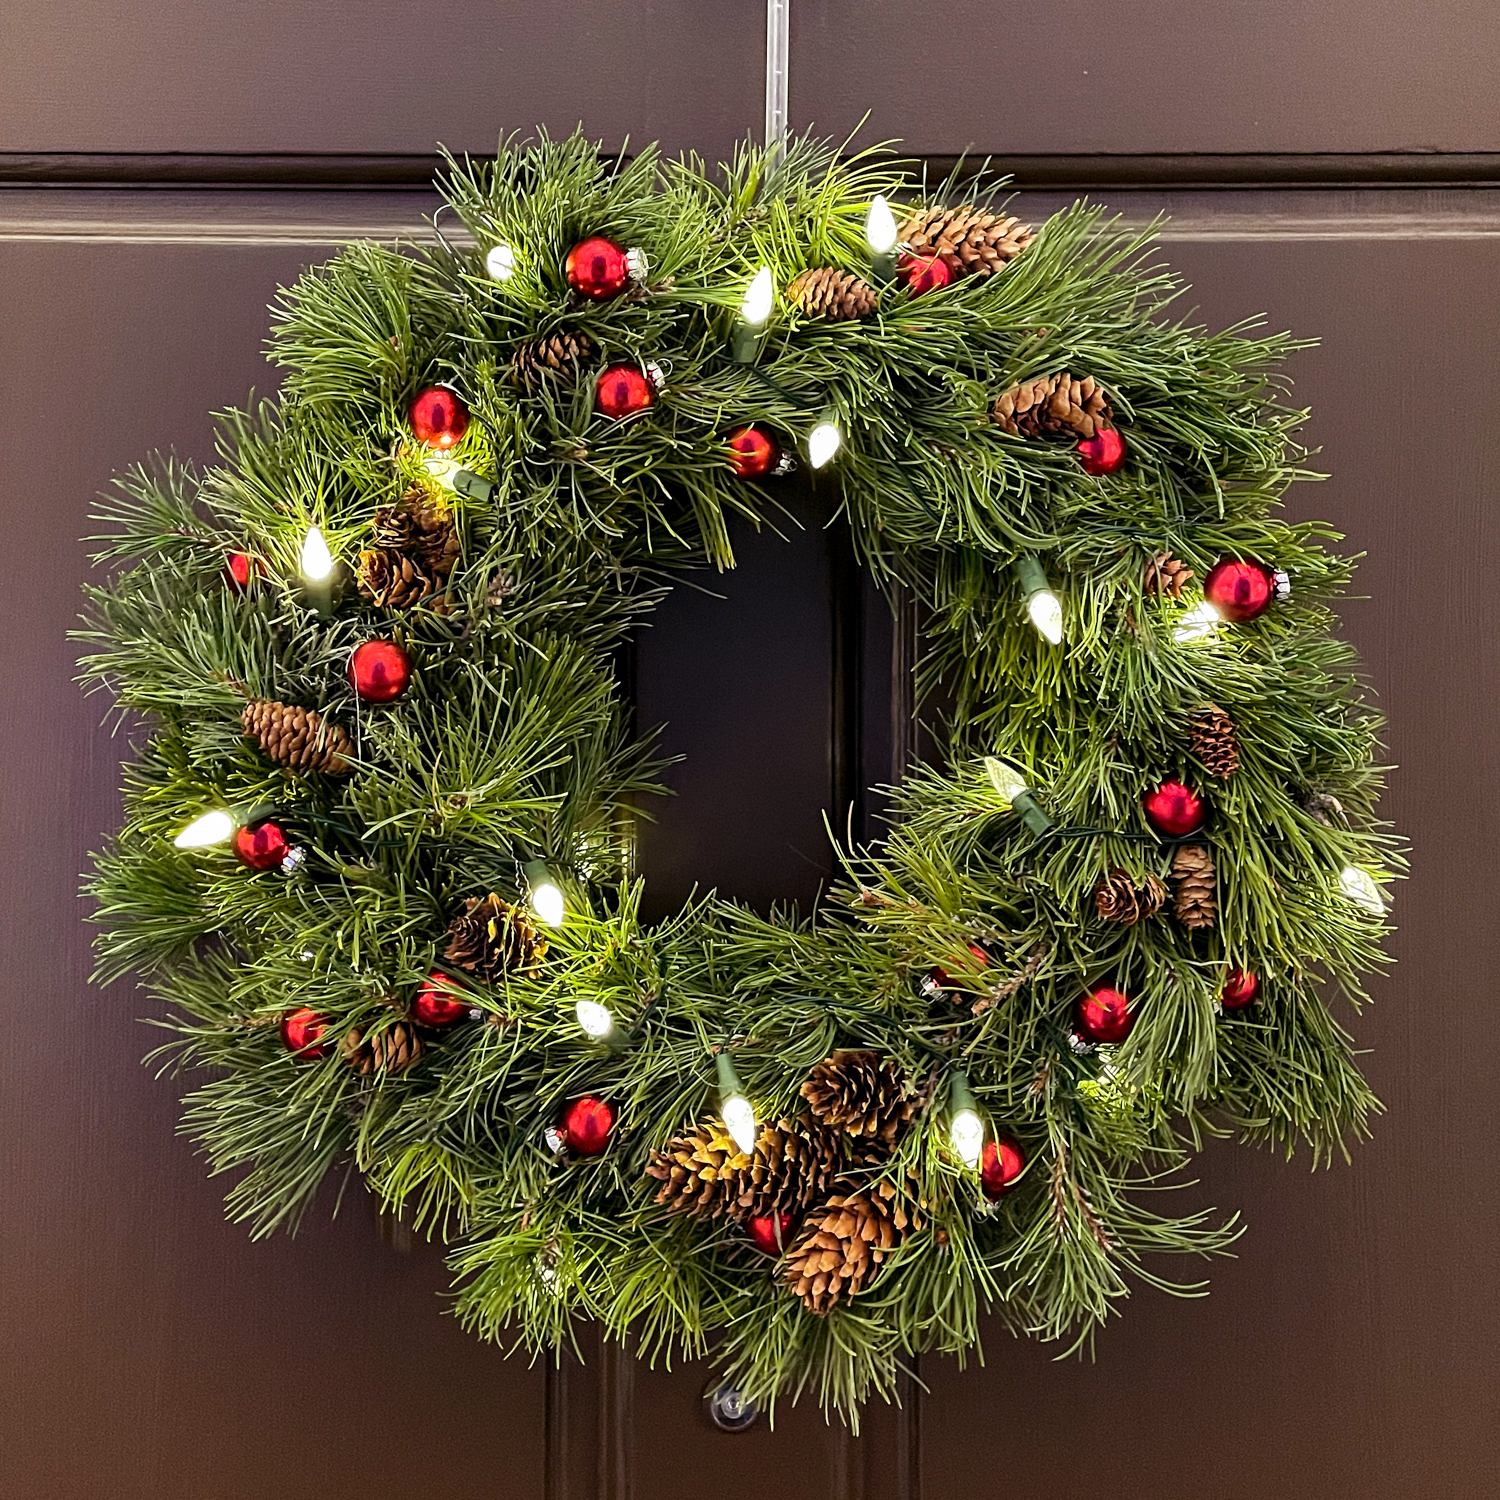 How to Make a Wreath Out of Real Pine Branches